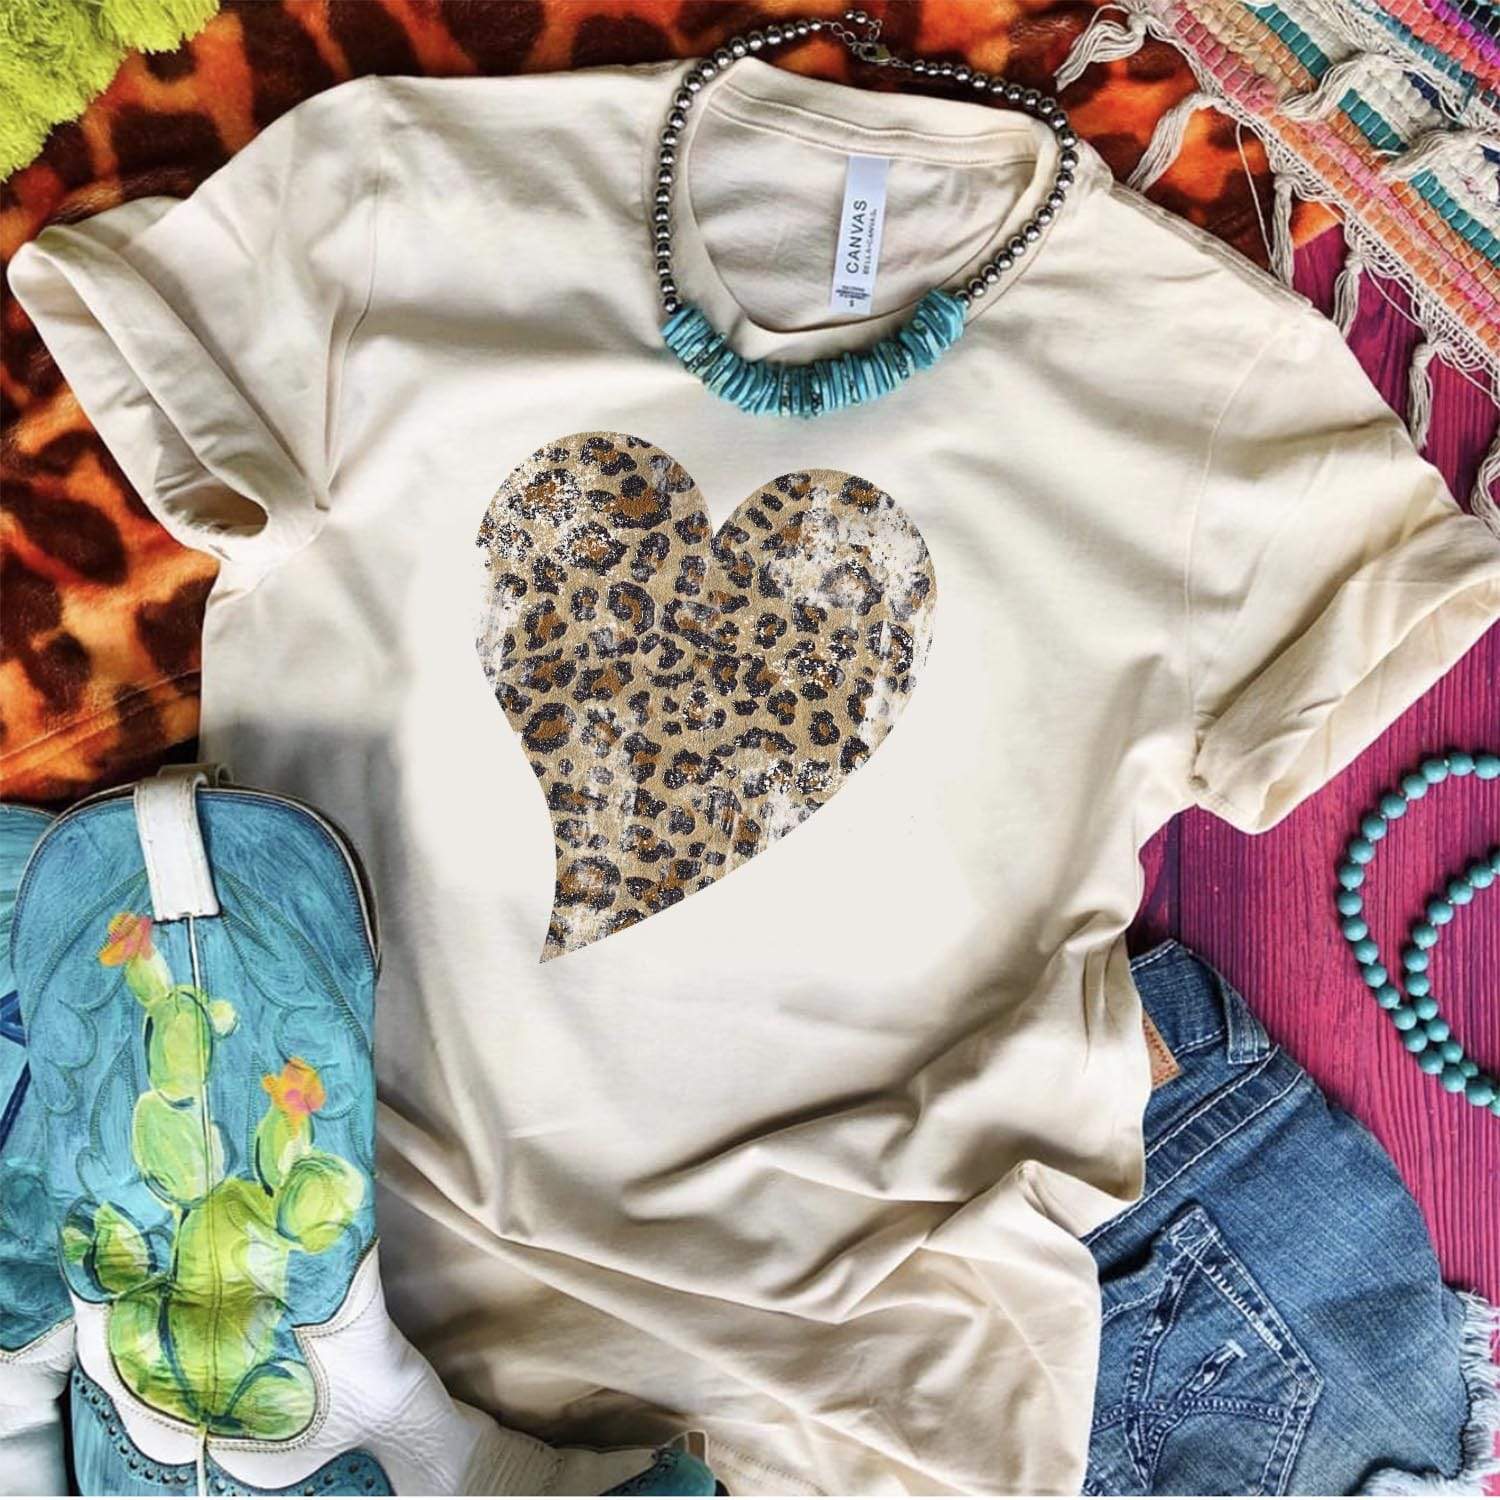 A cream color tee shirt laid on top of mix print rugs with cowgirl boots, a turquoise necklace, and denim shorts. The tee has a washed leopard print heart graphic.